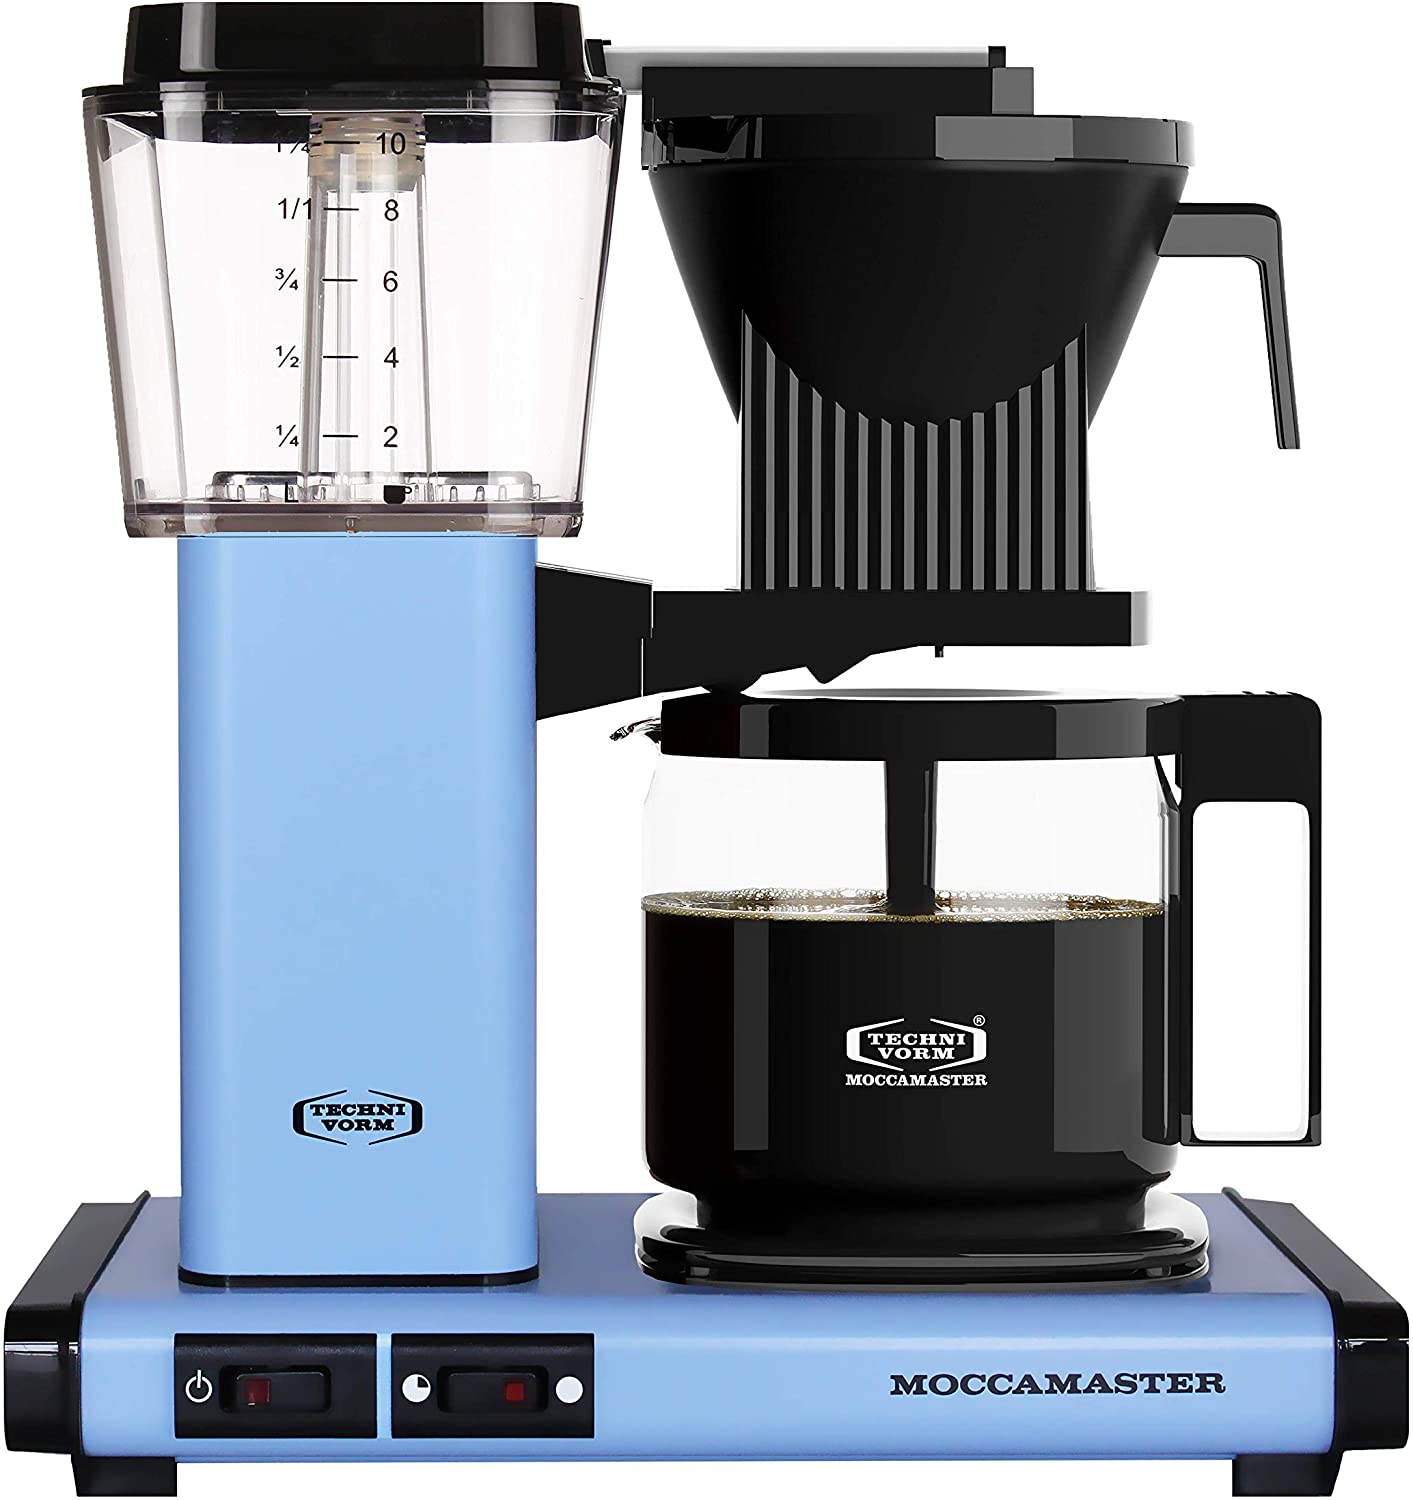 Moccamaster Filter Coffee Machine KBG 741 AO, 1.25 Litres, 1520 W, Pastel Blue